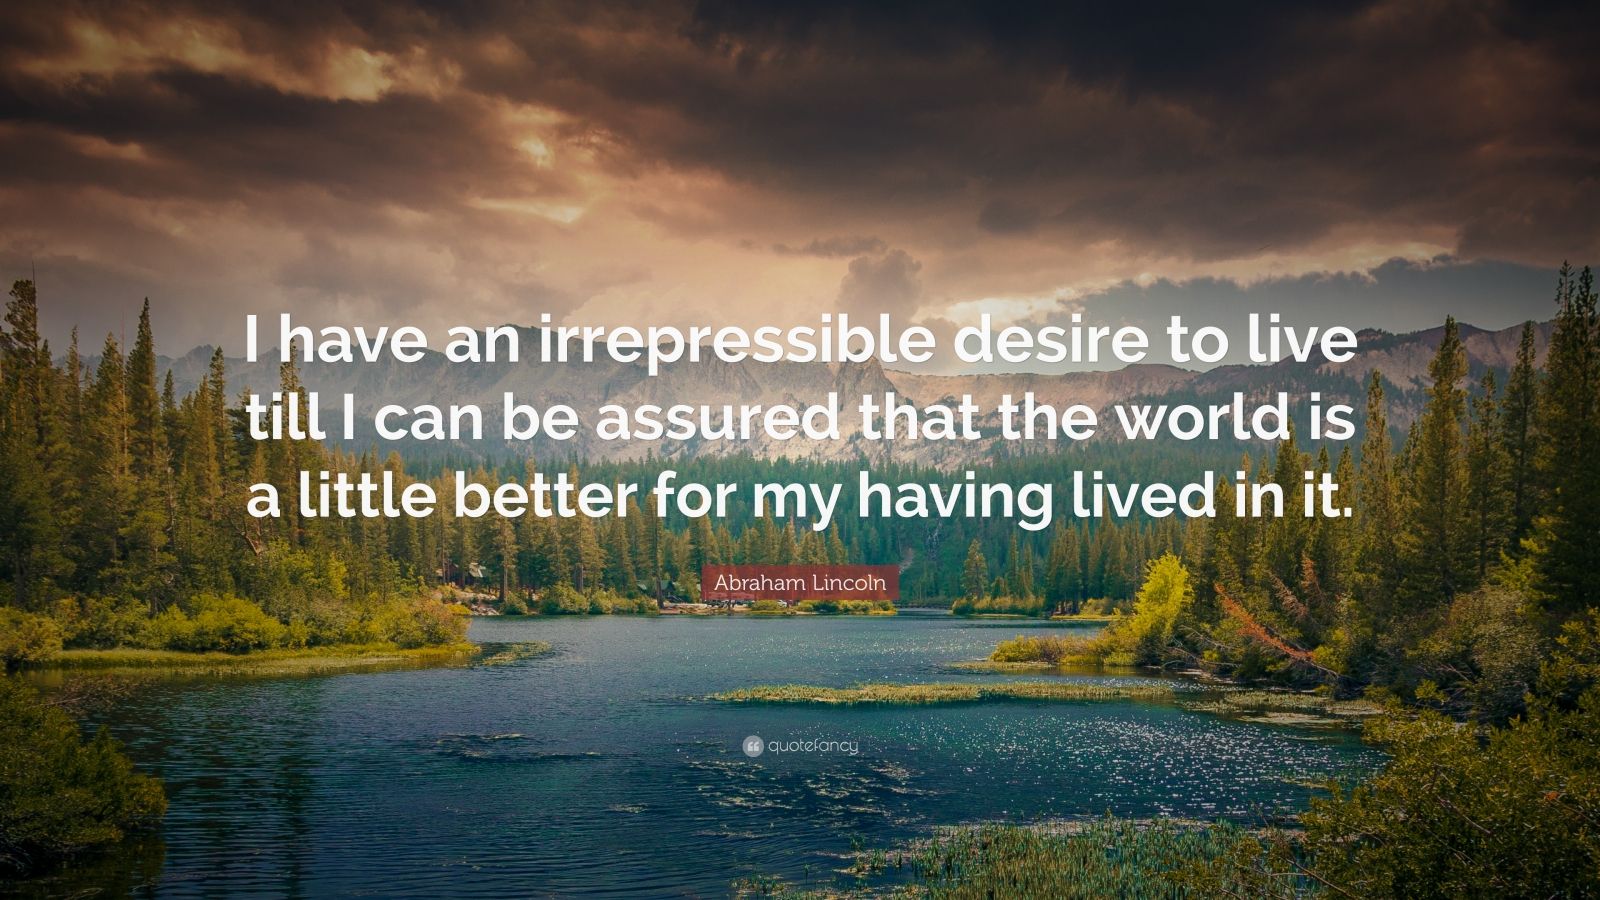 Abraham Lincoln Quote: “I have an irrepressible desire to live till I ...